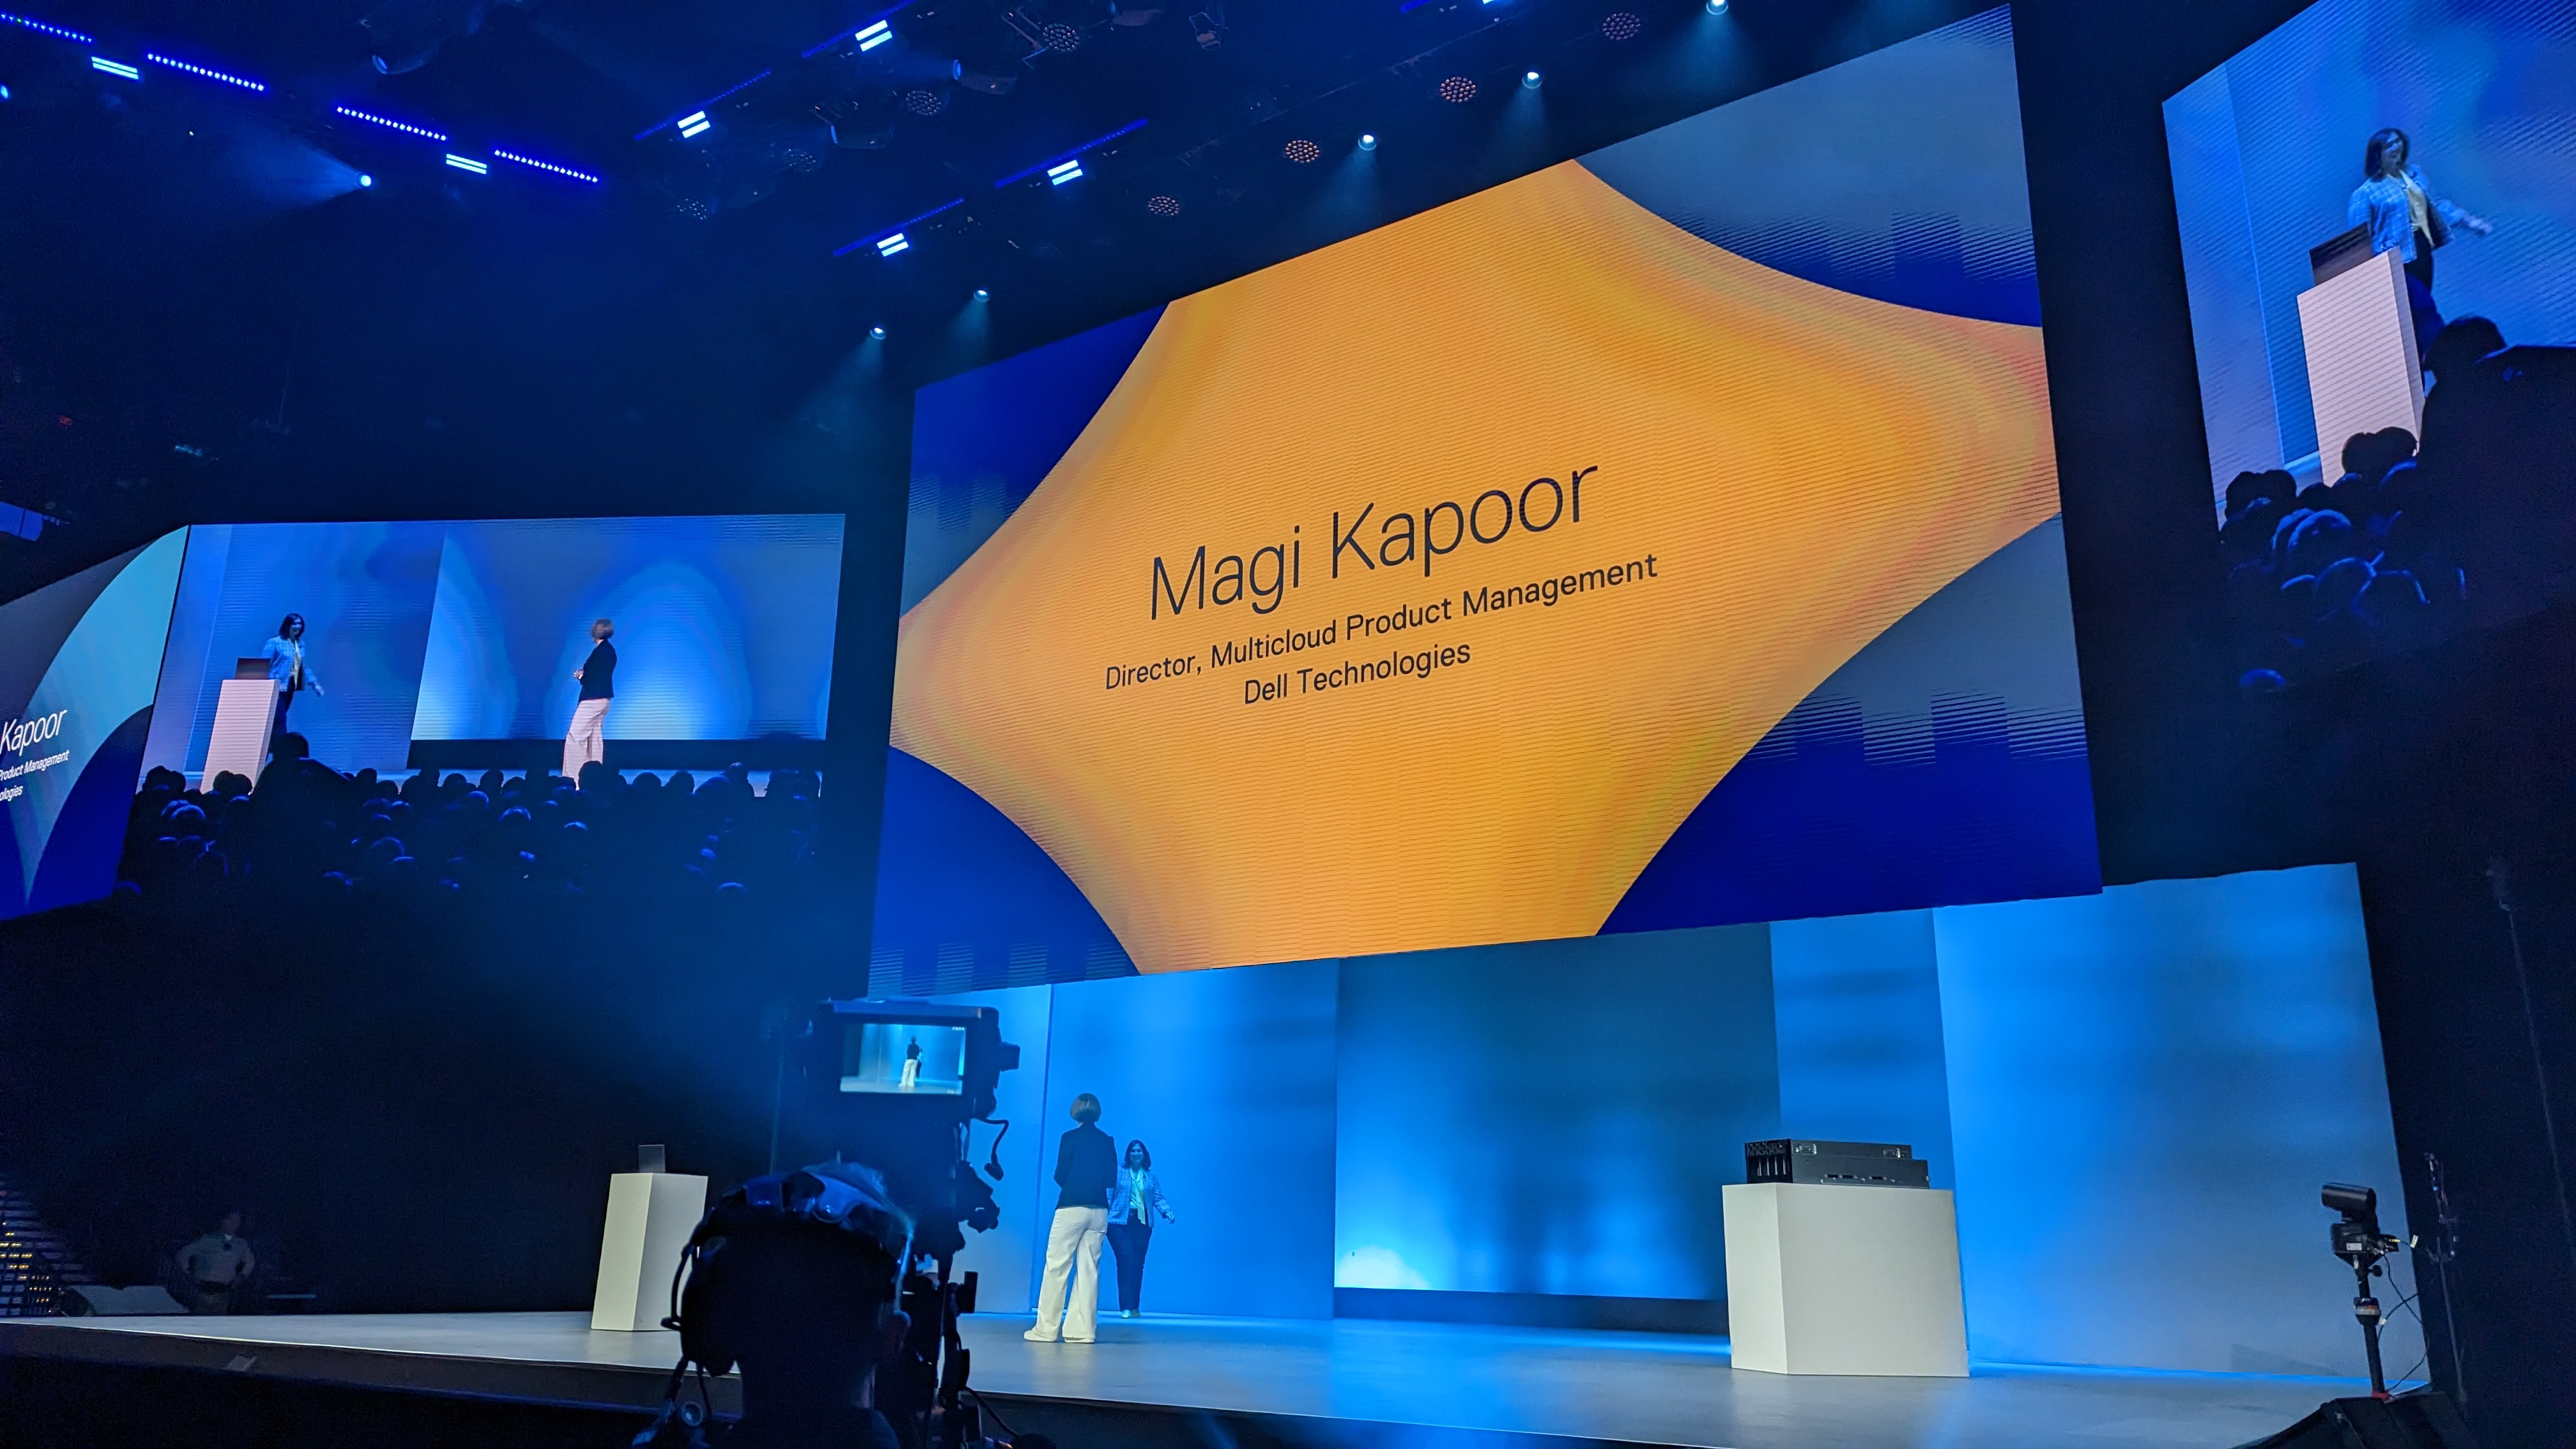 A screen that reads 'Magi Kapoor, Director, Multicloud Product Management Dell Technologies'' on an orange stylised diamond shape, with Dell chief digital officer and CIO Jen Felch welcoming Magi Kapoor onto the keynote stage at Dell Technologies World 2023.